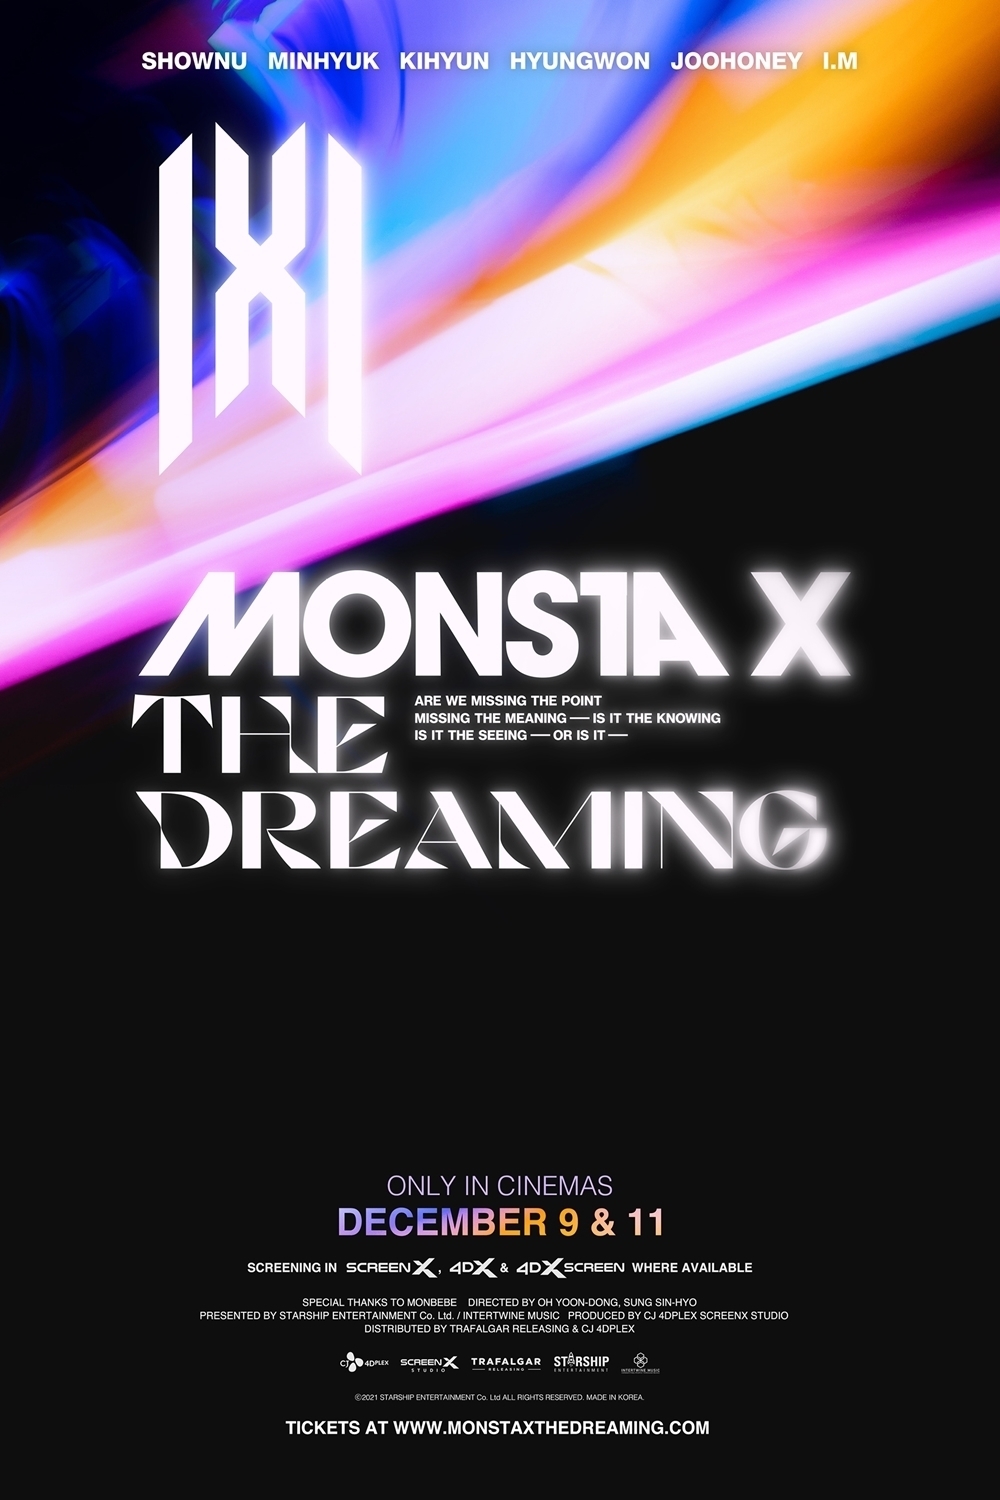 MONSTA X THE DREAMING Tickets & Showtimes College Point Multiplex